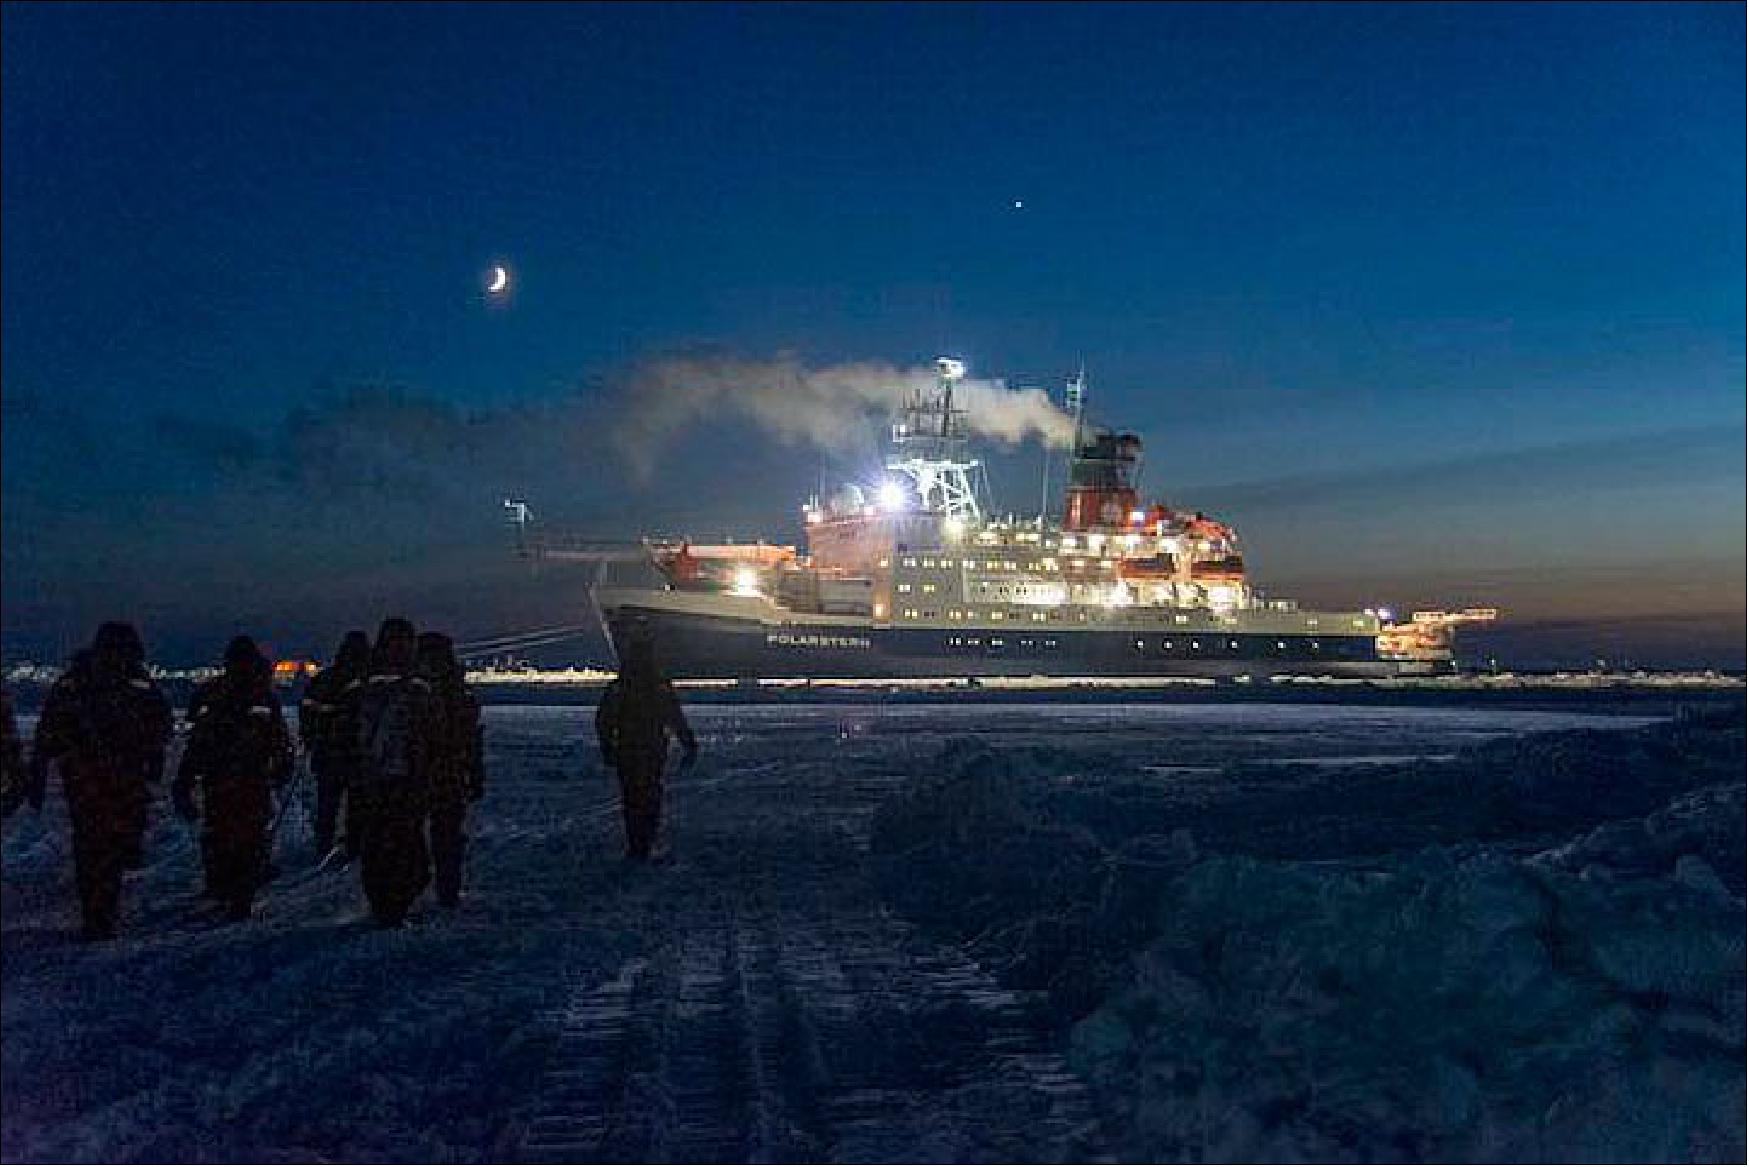 Figure 42: Scientists from MOSAiC Leg 3 walk from the Kapitan Dranitsyn to their new home on Polarstern (photo credit: NASA, Steven Fons)